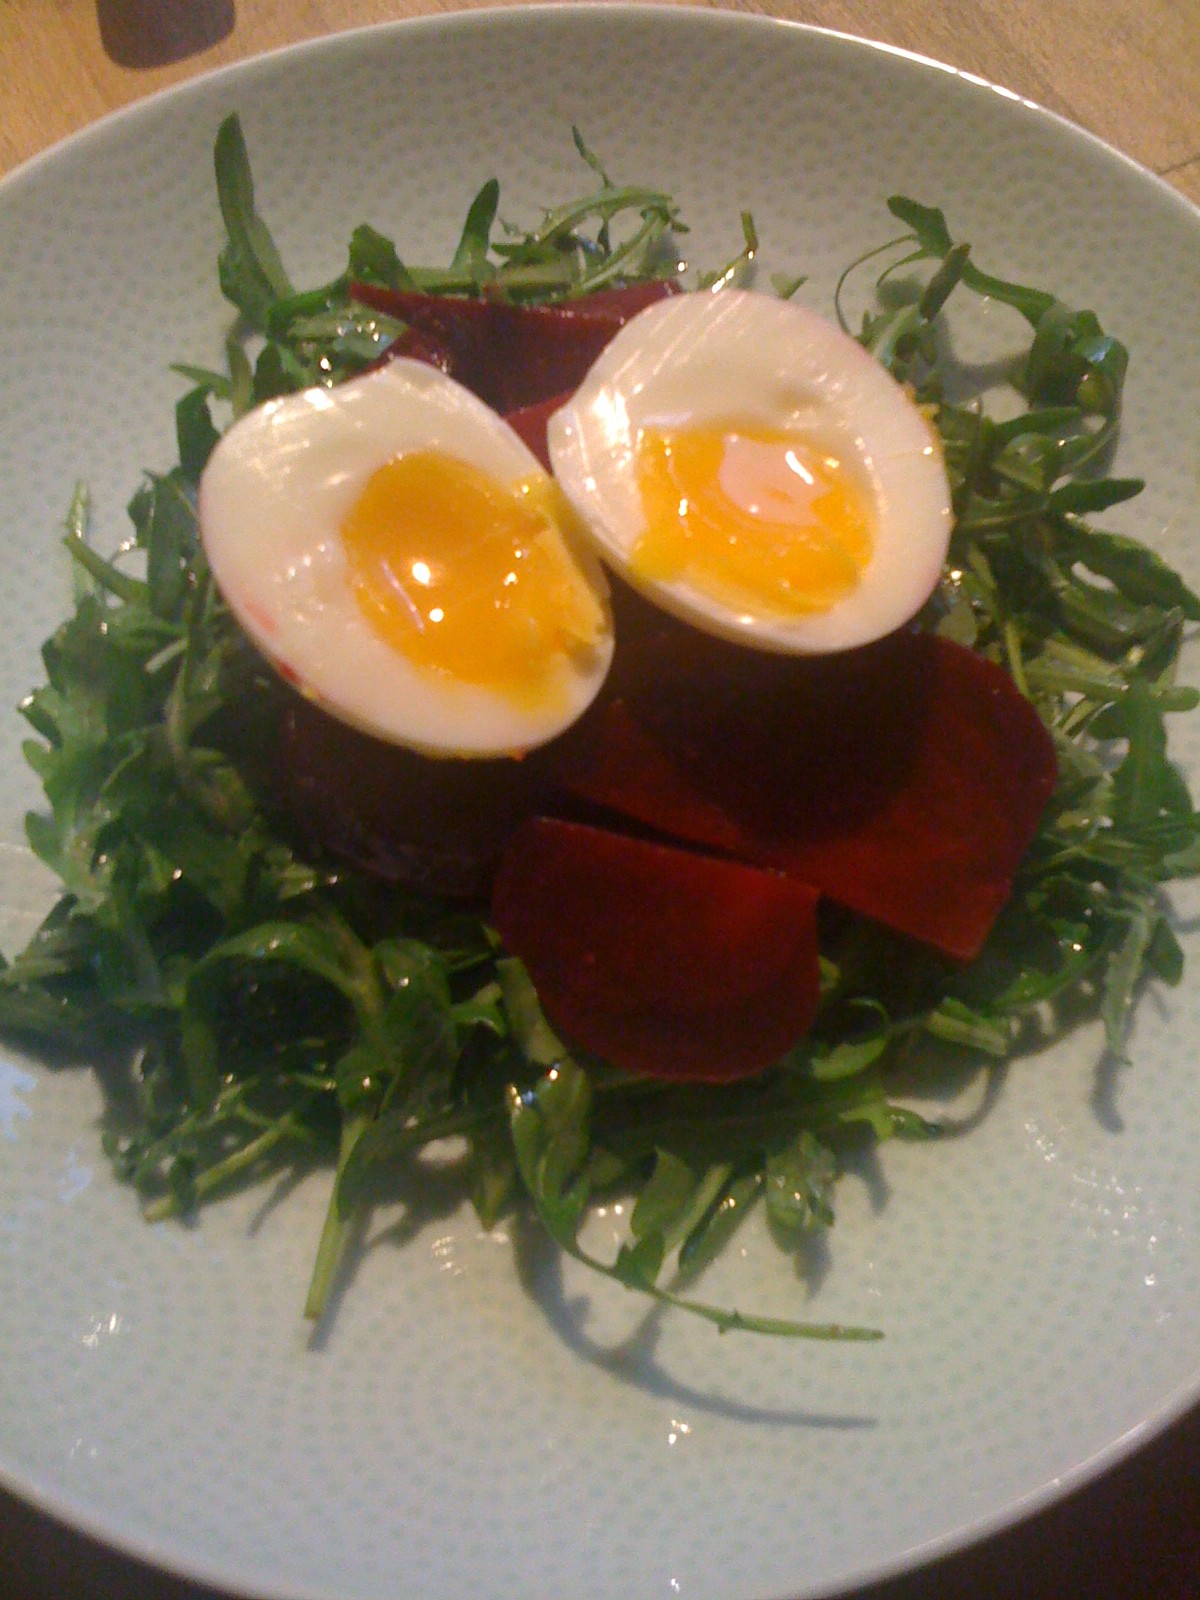 Beet Salad tossed in an Anchovy Infused Balsamic Dressing, served on a Bed of Baby Arugula and topped with a Farm Fresh Soft Boiled Egg